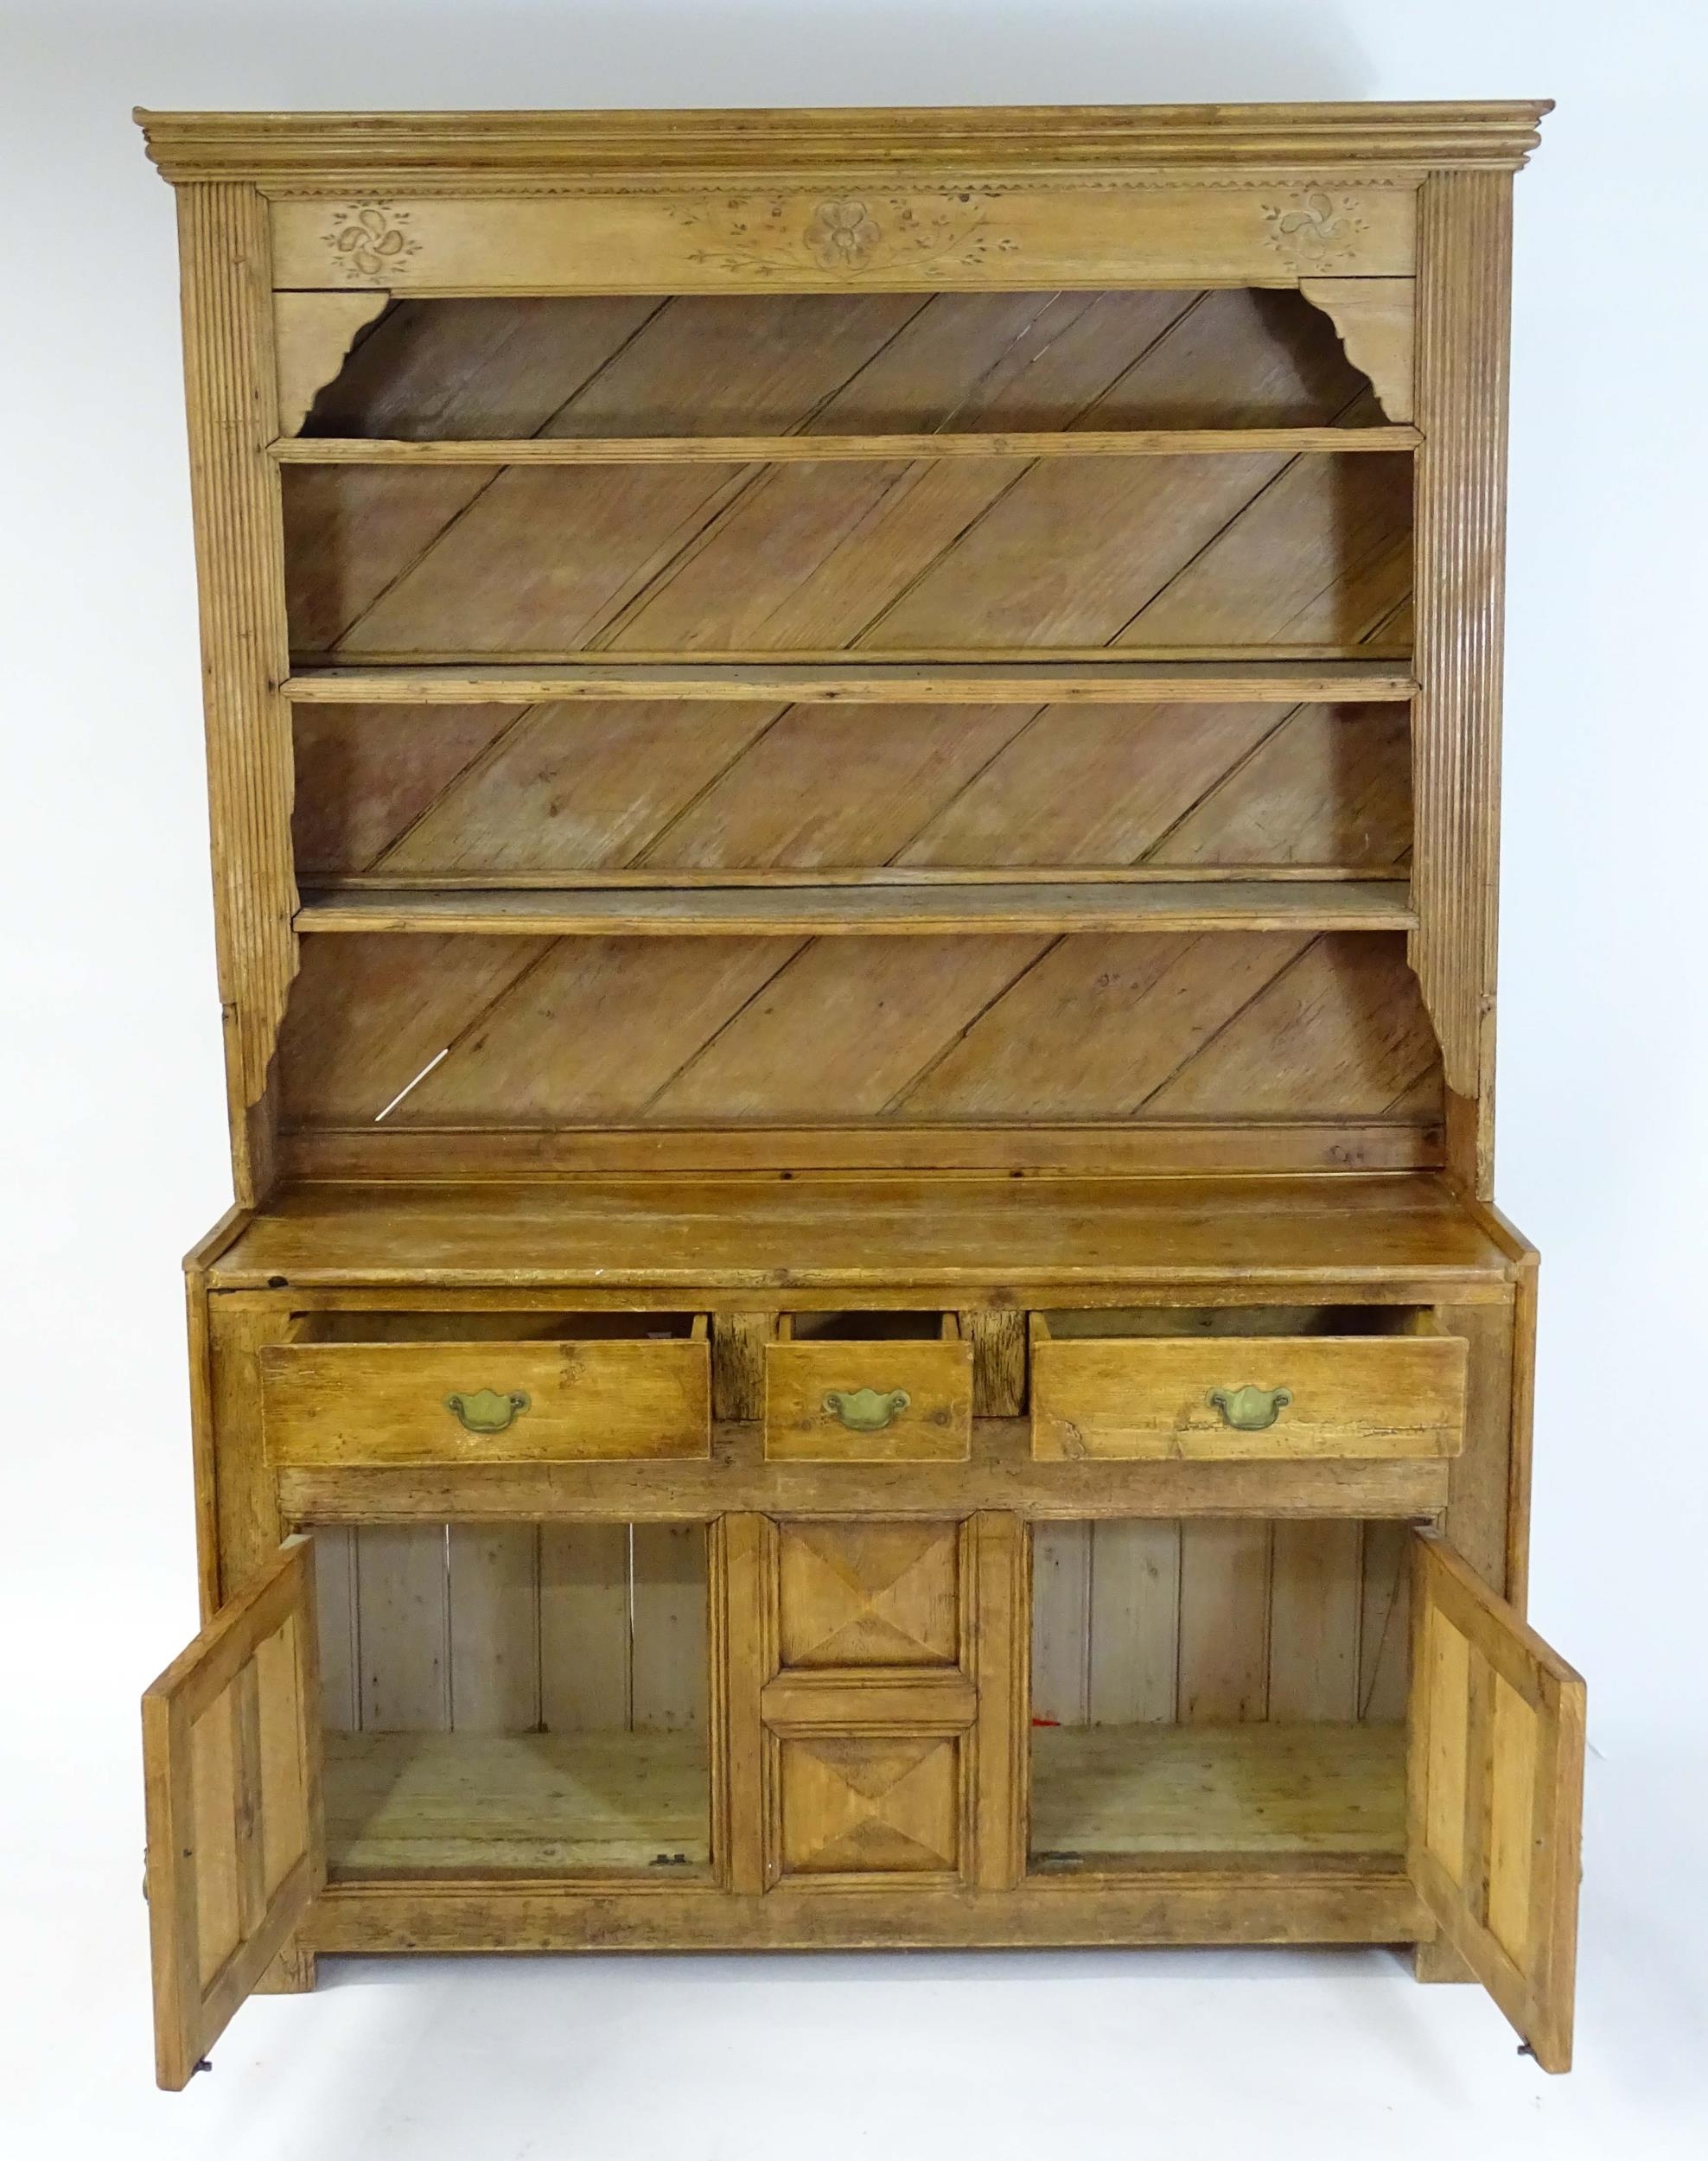 A 20thC pine dresser with a moulded cornice above floral carving flanked by reeded pilaster - Image 4 of 10